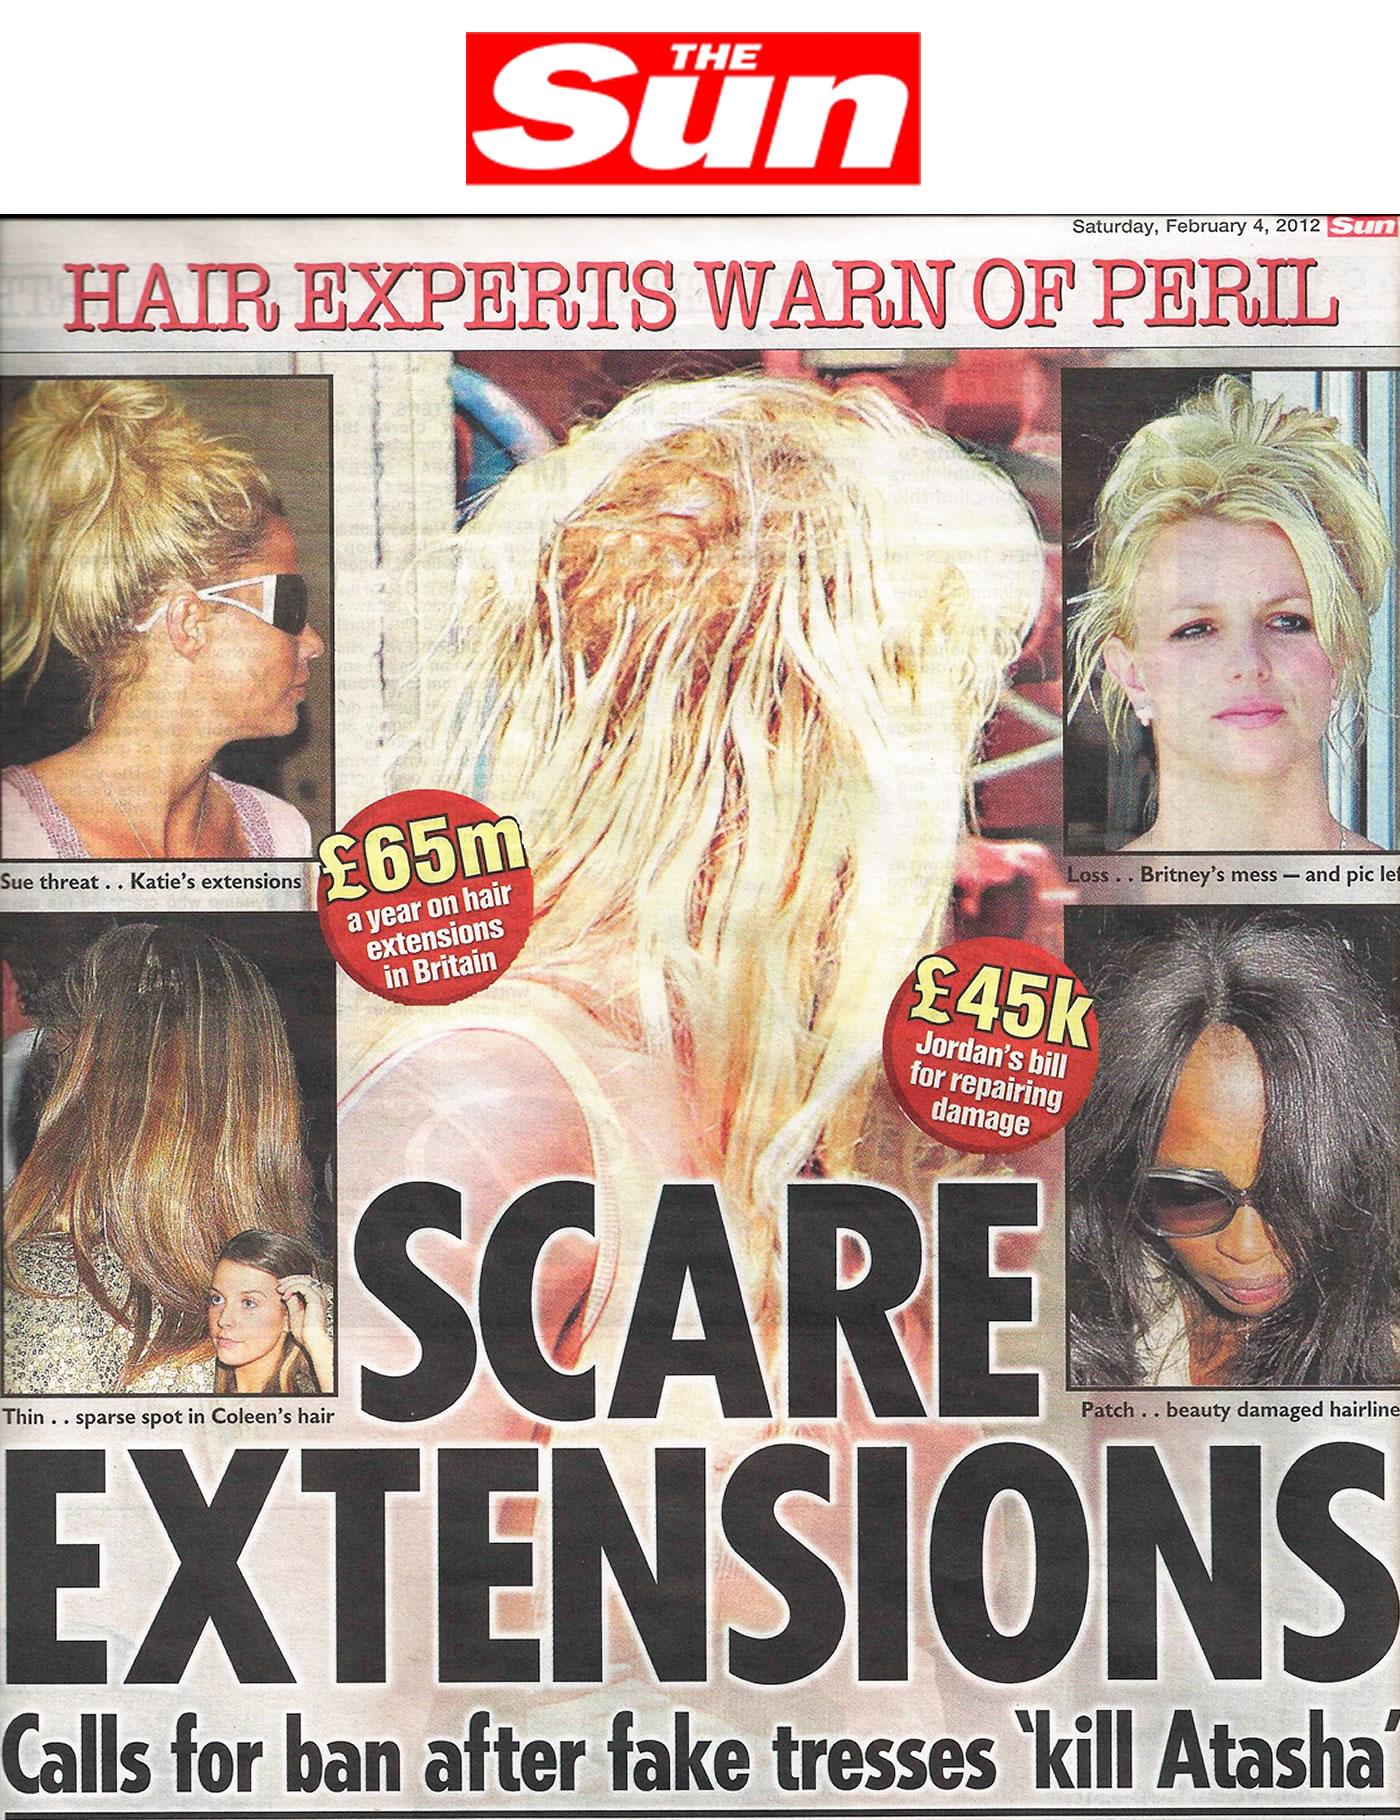 'Scare Extensions - calls for ban after glue 'kills' girl' - The Sun & others